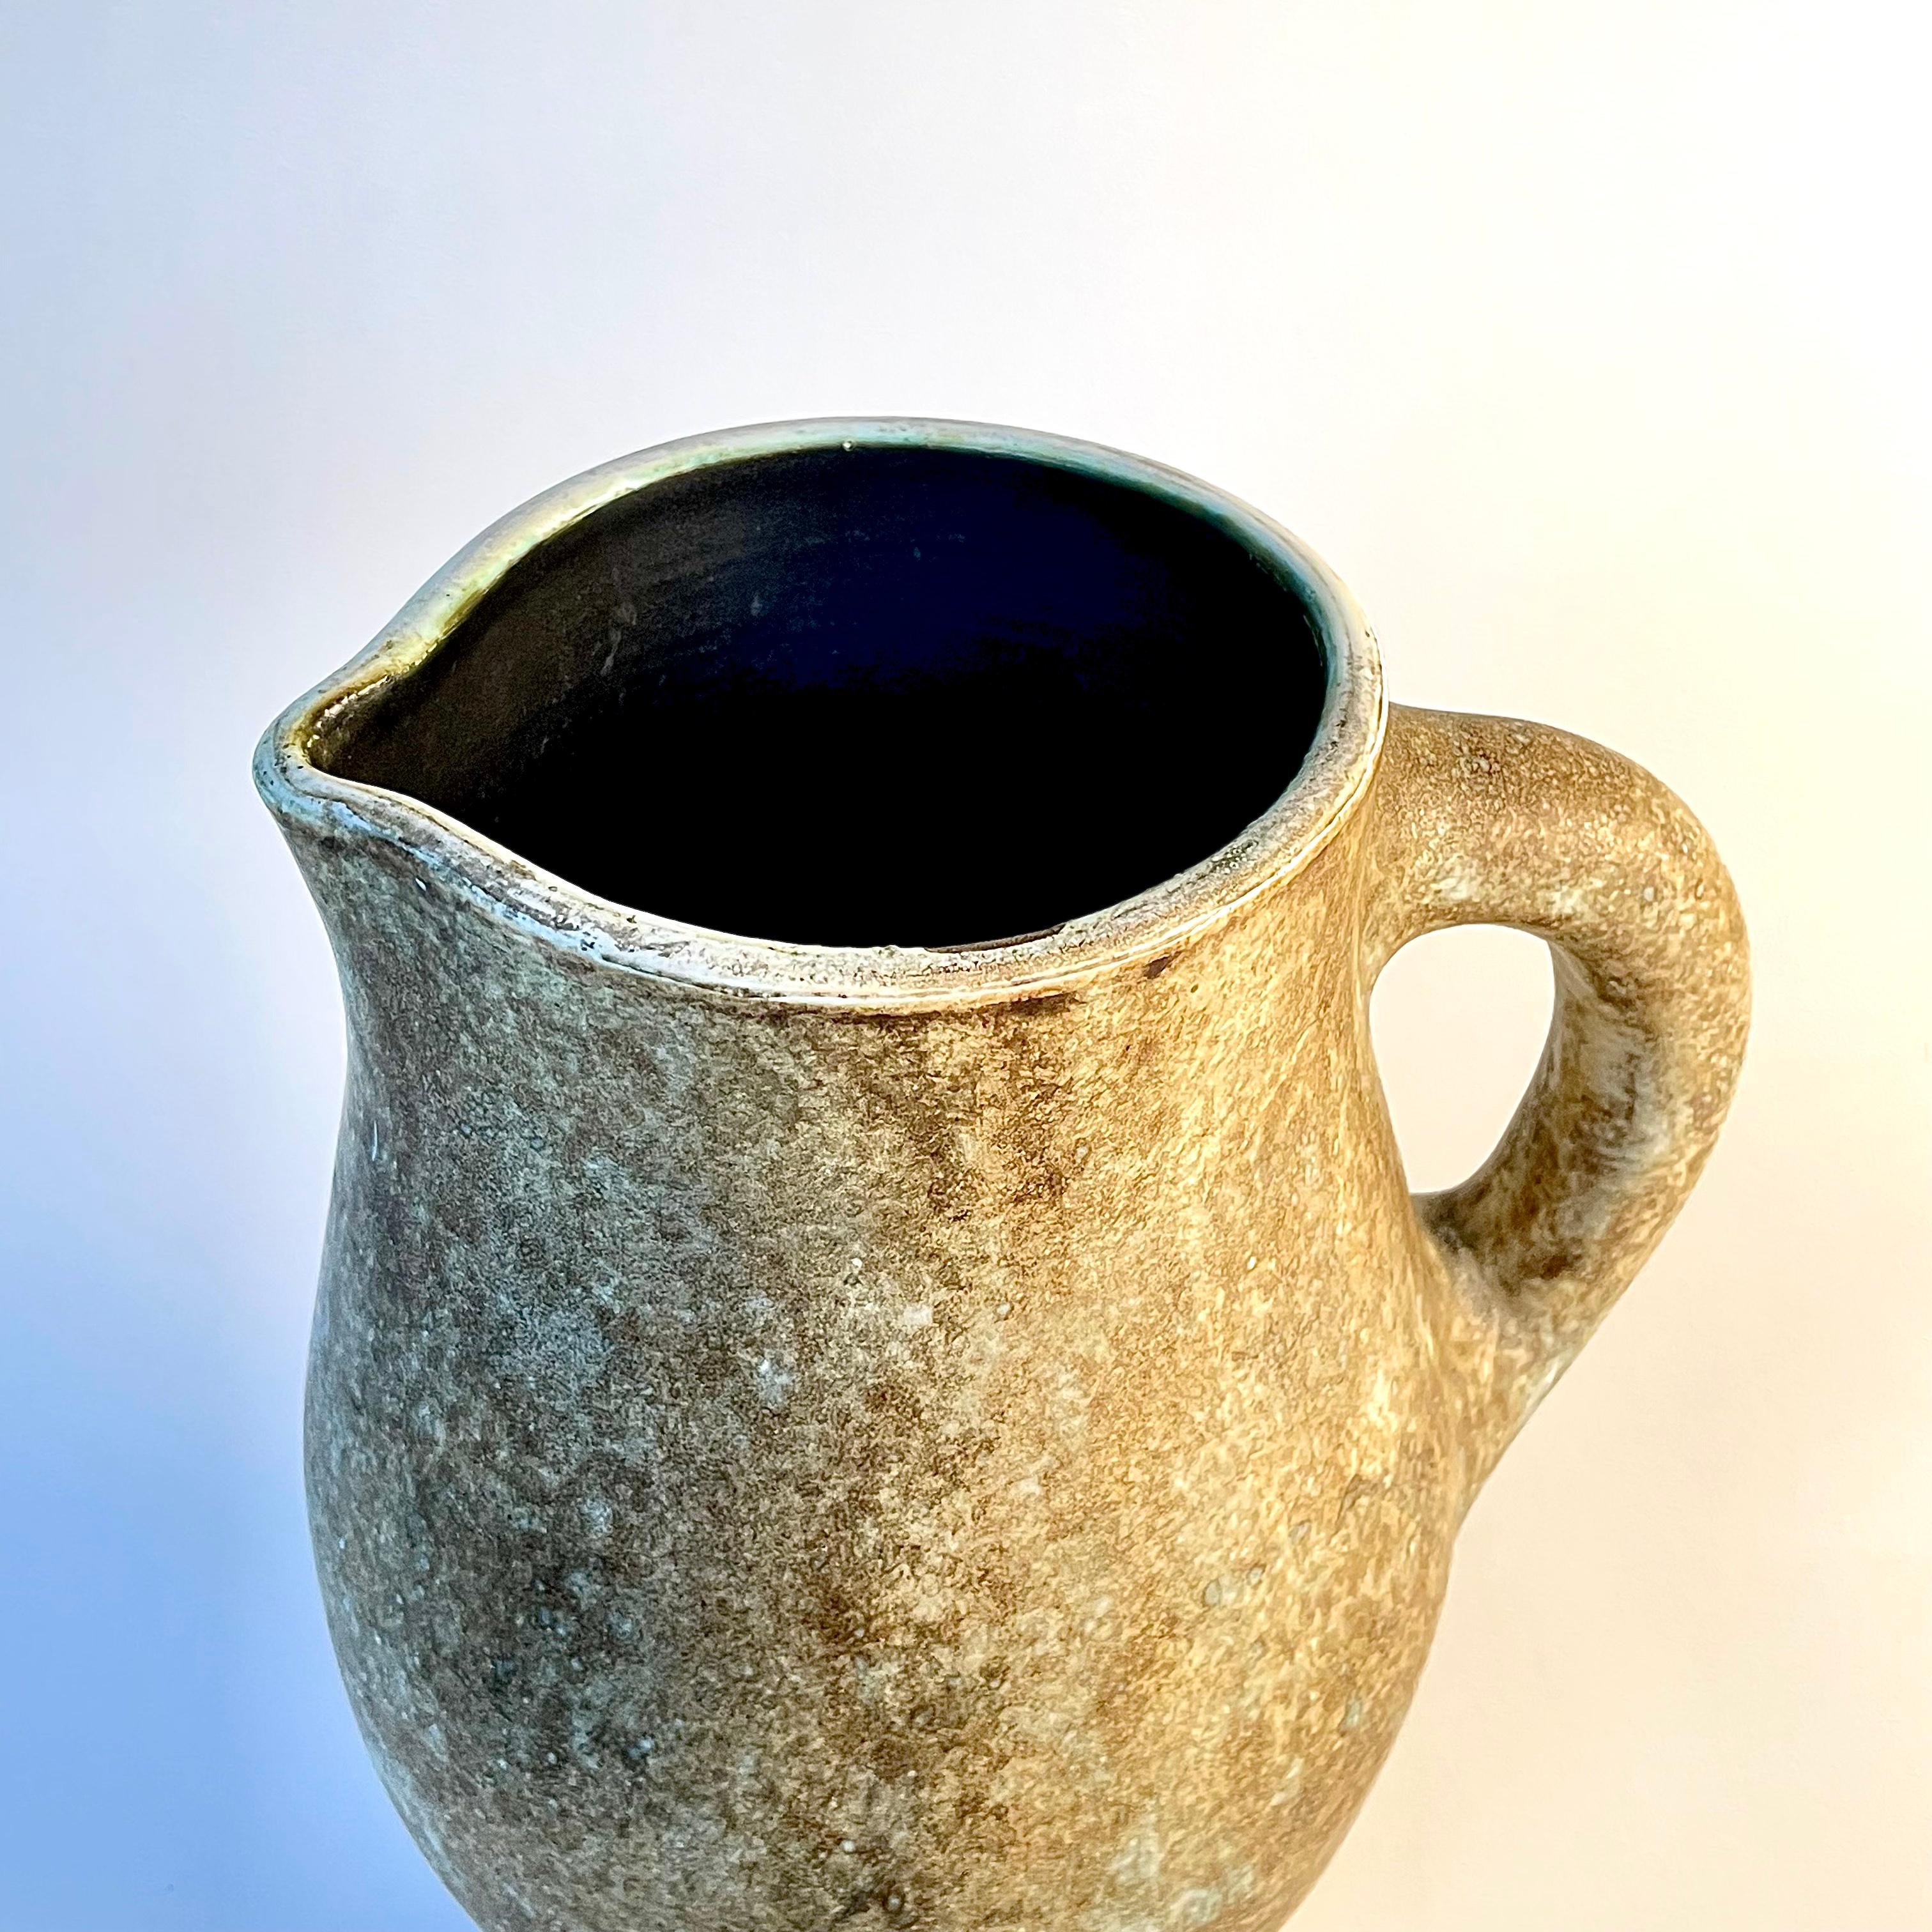 Glazed Ceramic pitcher by Jacques and Michelle Serre, Les 2 potiers, circa 1950